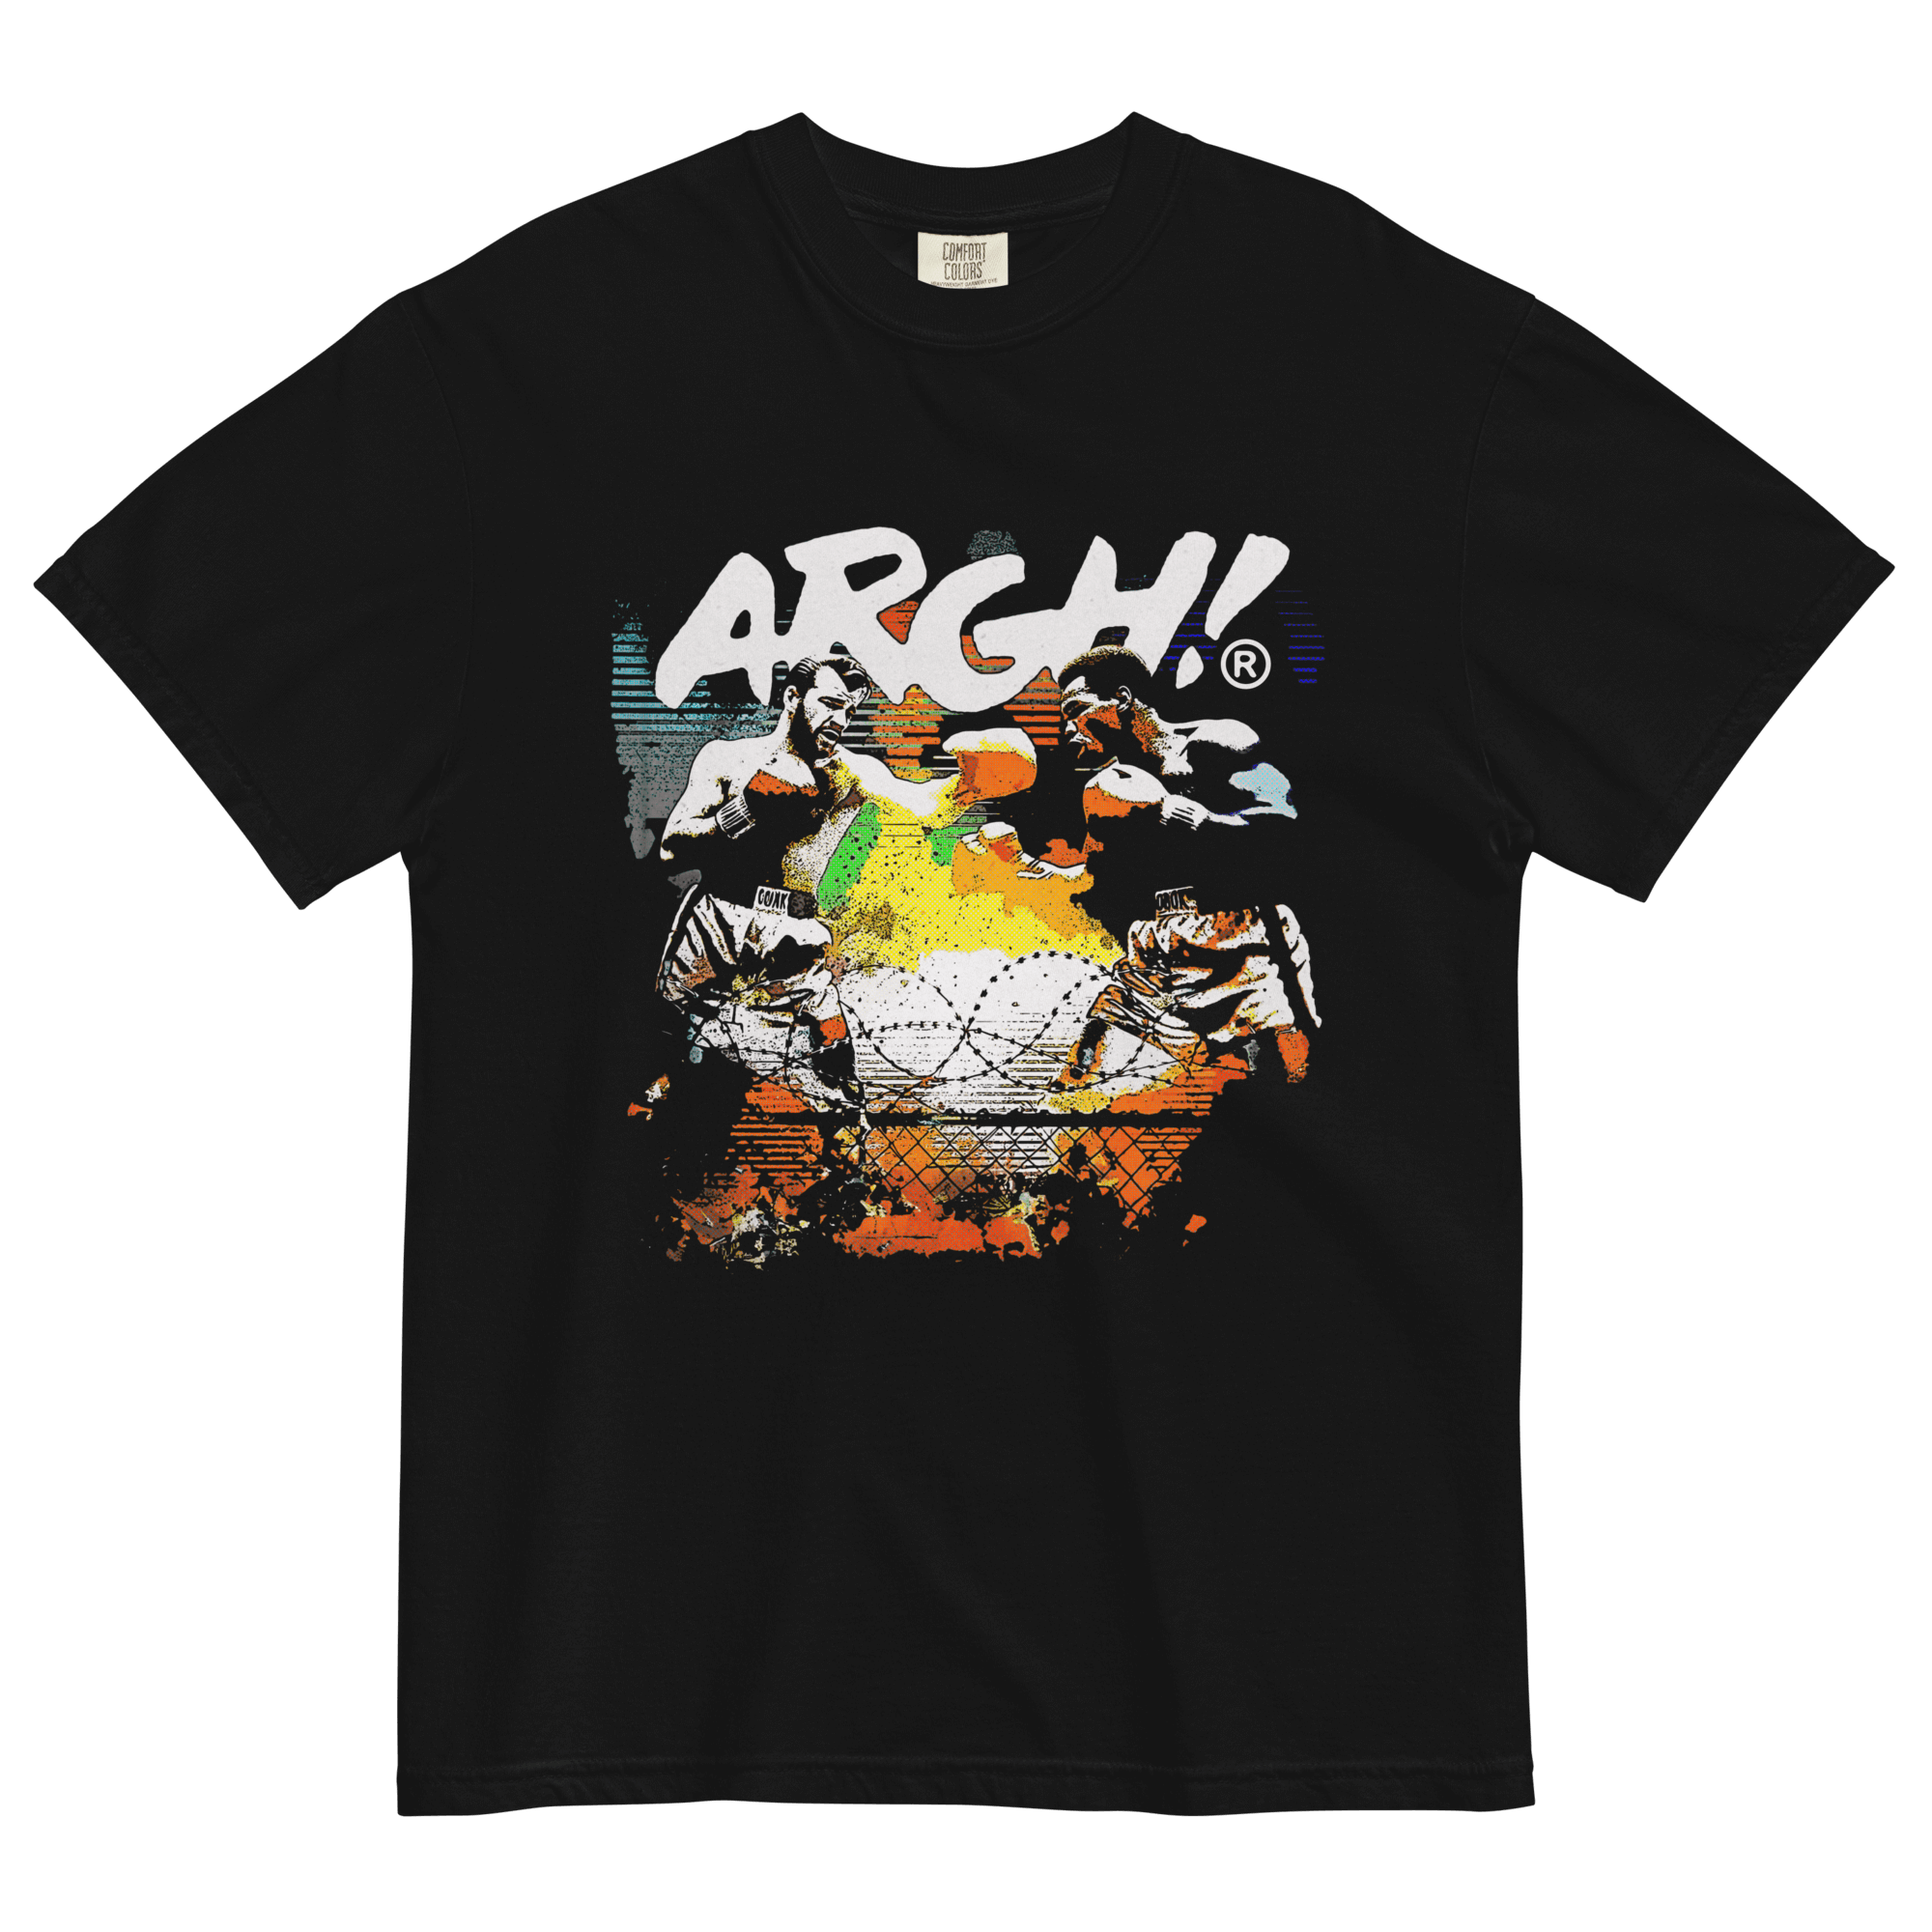 ARGH! T-shirtARGH! T-shirt. If you seek a robust, well-structured tee that's simultaneously luxuriously soft and breathable, your search ends here! The unisex garment-dyed heavyweight t-shirt checks all the boxes, crafted from 100% ring-spun cotton. The c